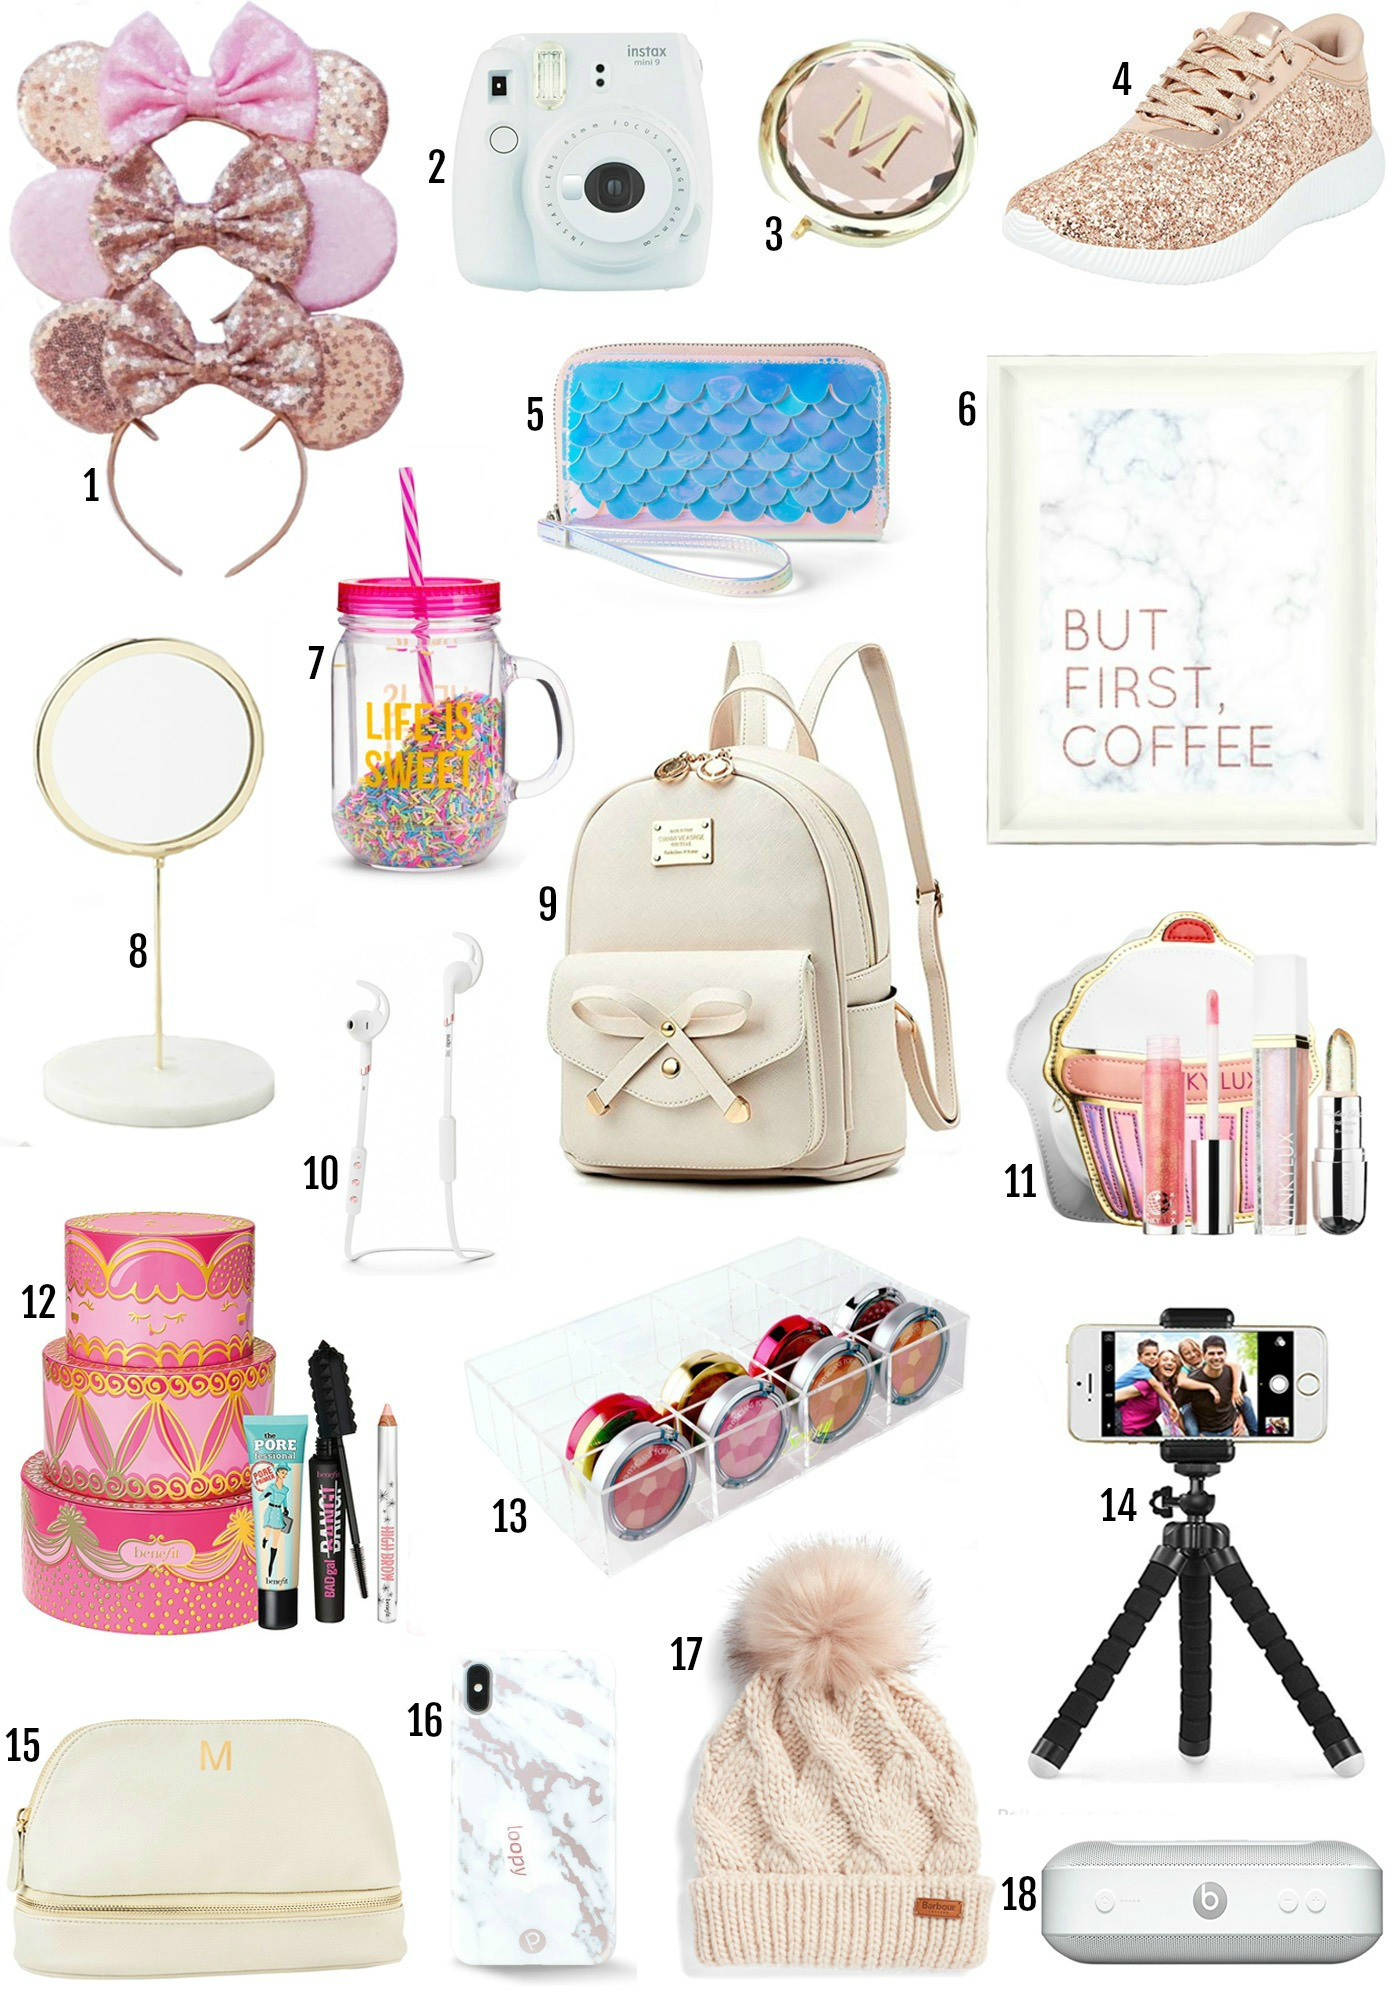 Top Gift Ideas For Girls
 Top Gifts For Teens